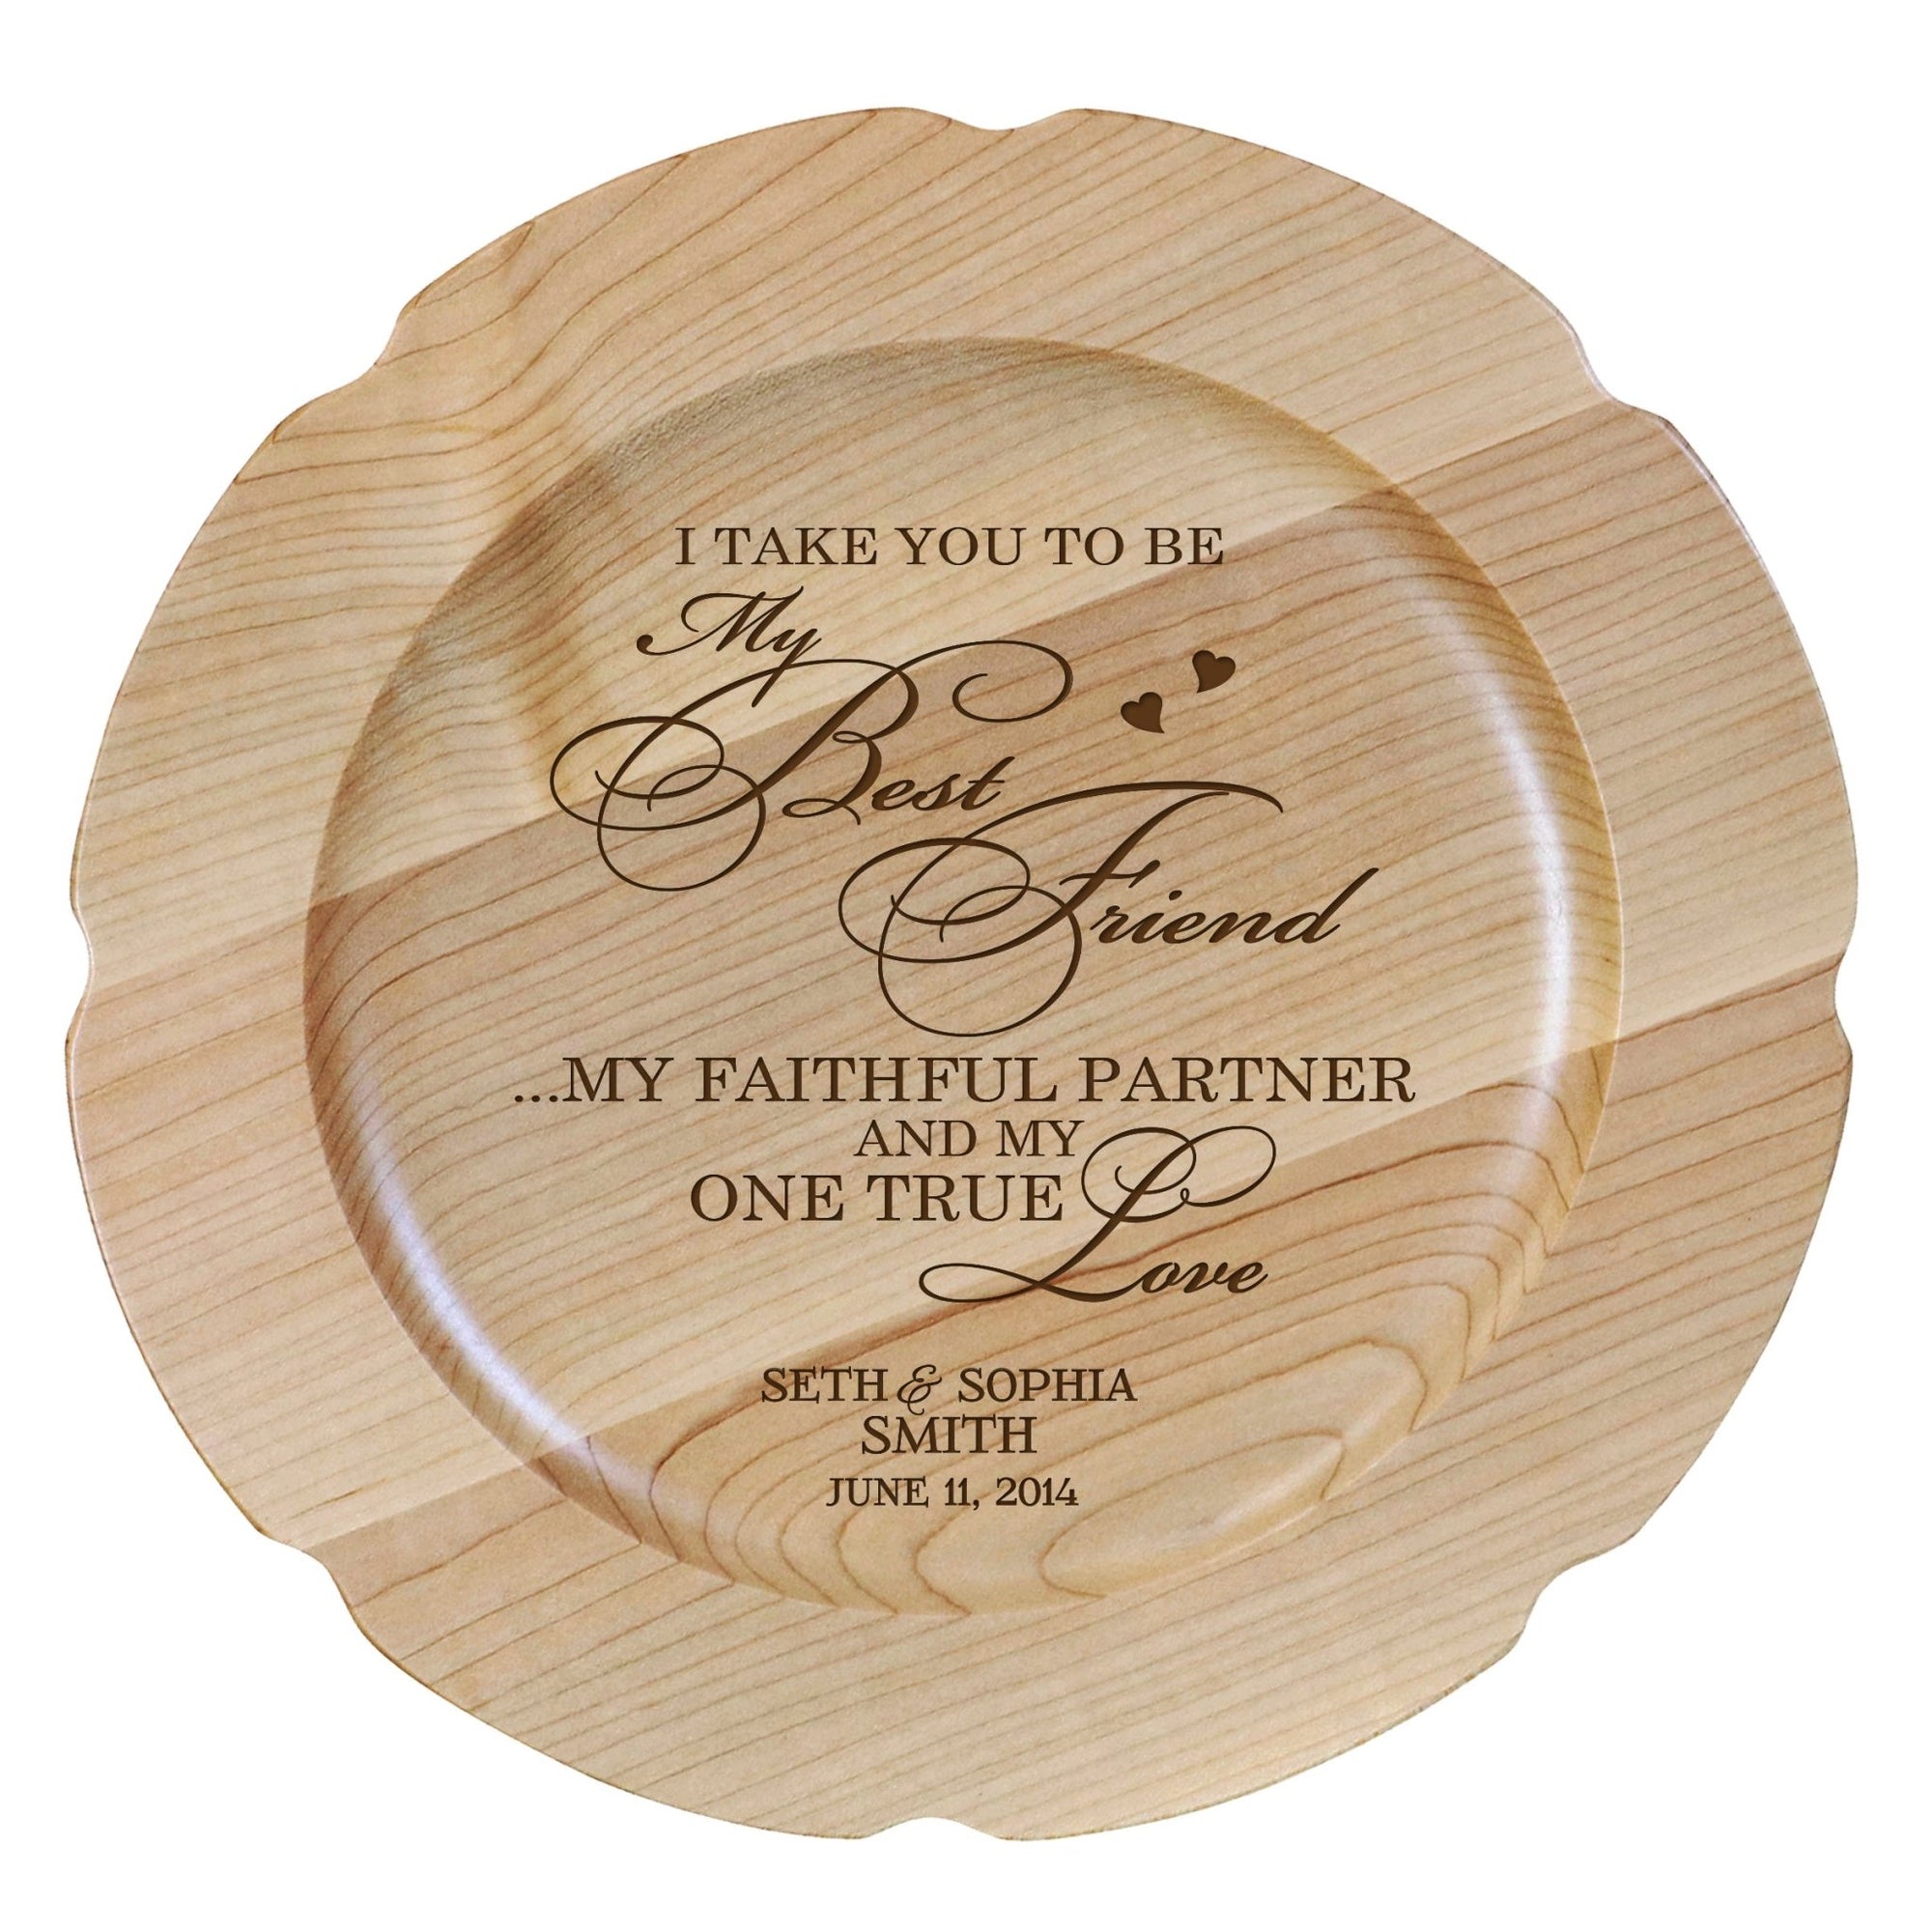 Personalized Wedding Vow Plates - Best Friend Vow - LifeSong Milestones